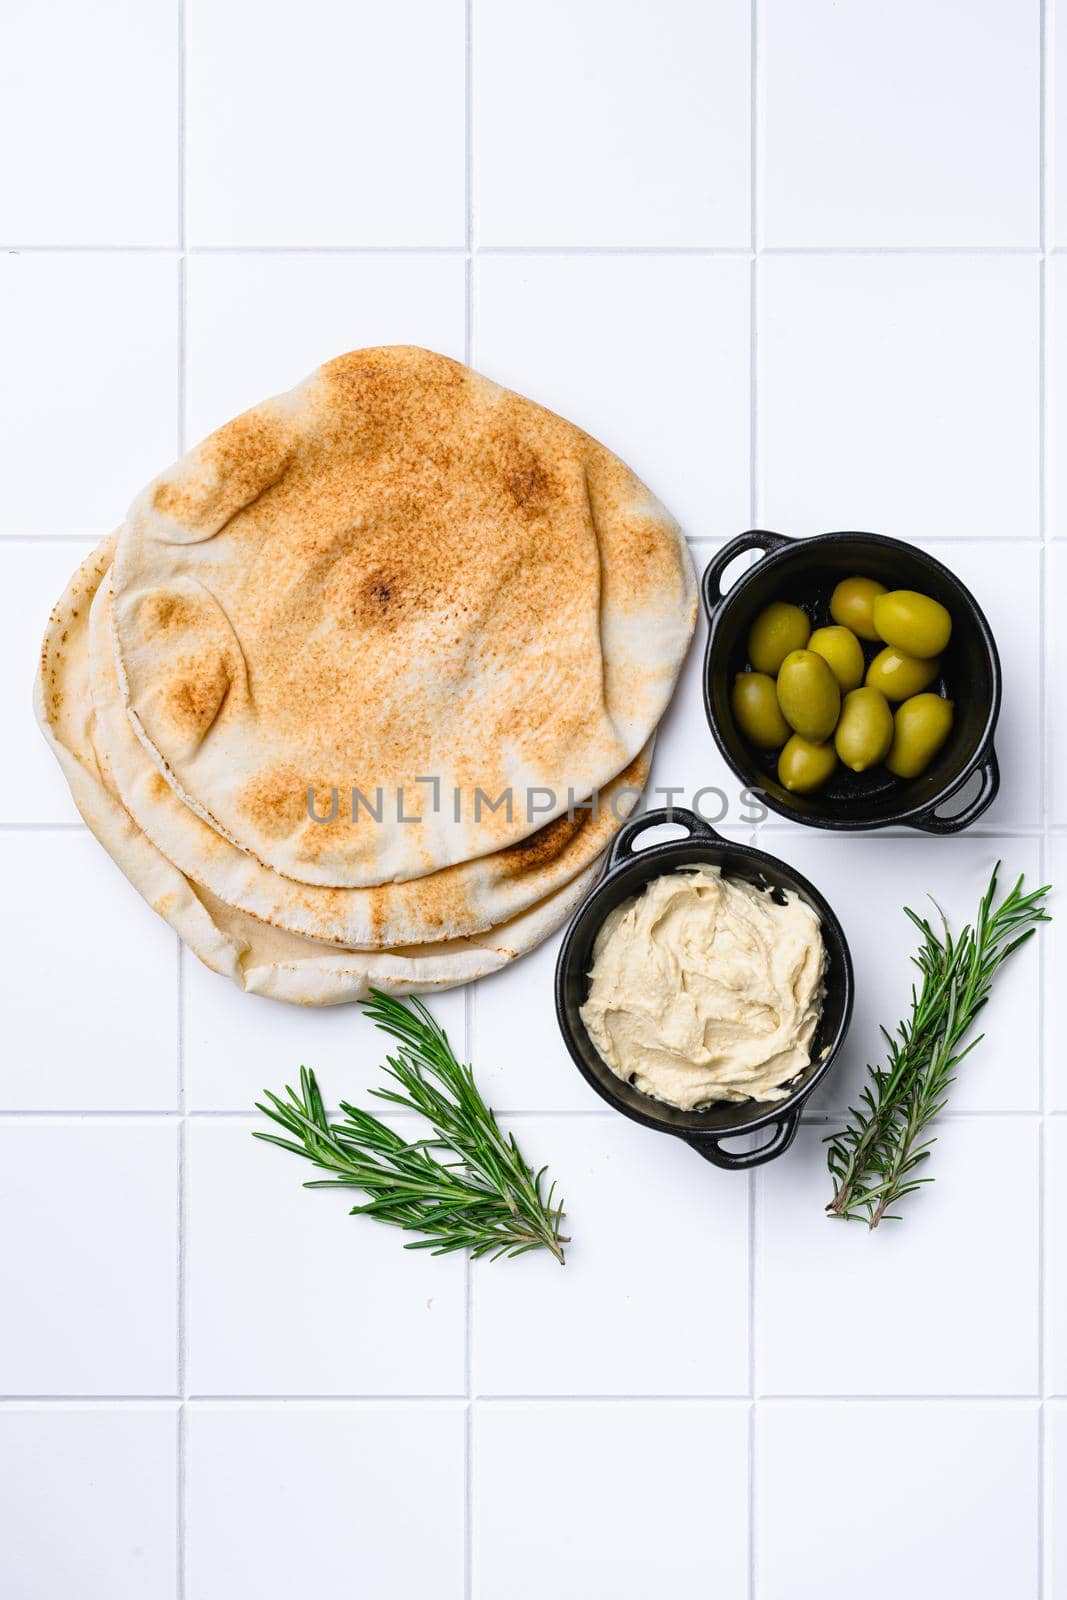 Hummus and pita bread set, on white ceramic squared tile table background, top view flat lay, with copy space for text by Ilianesolenyi